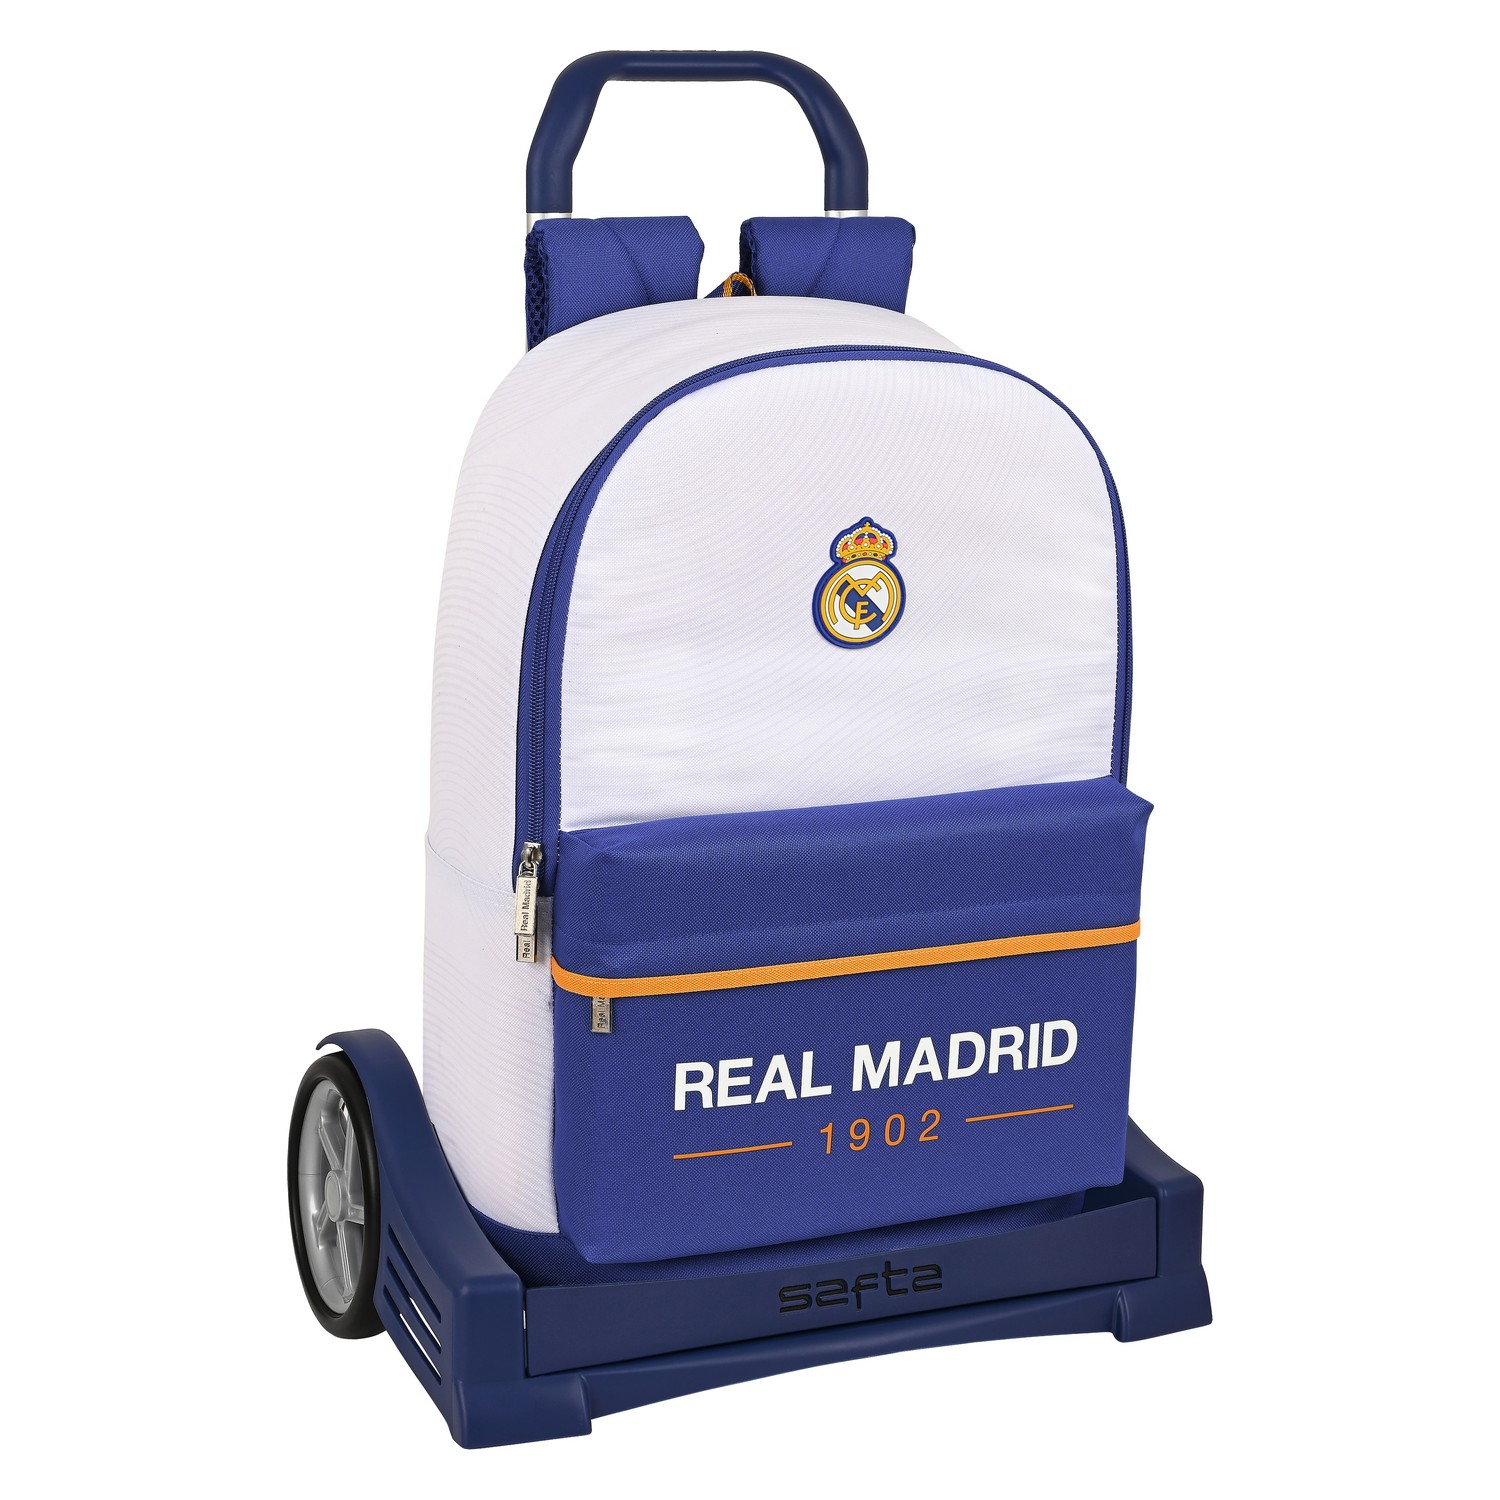 Cartable à roulettes Real Madrid C.F.